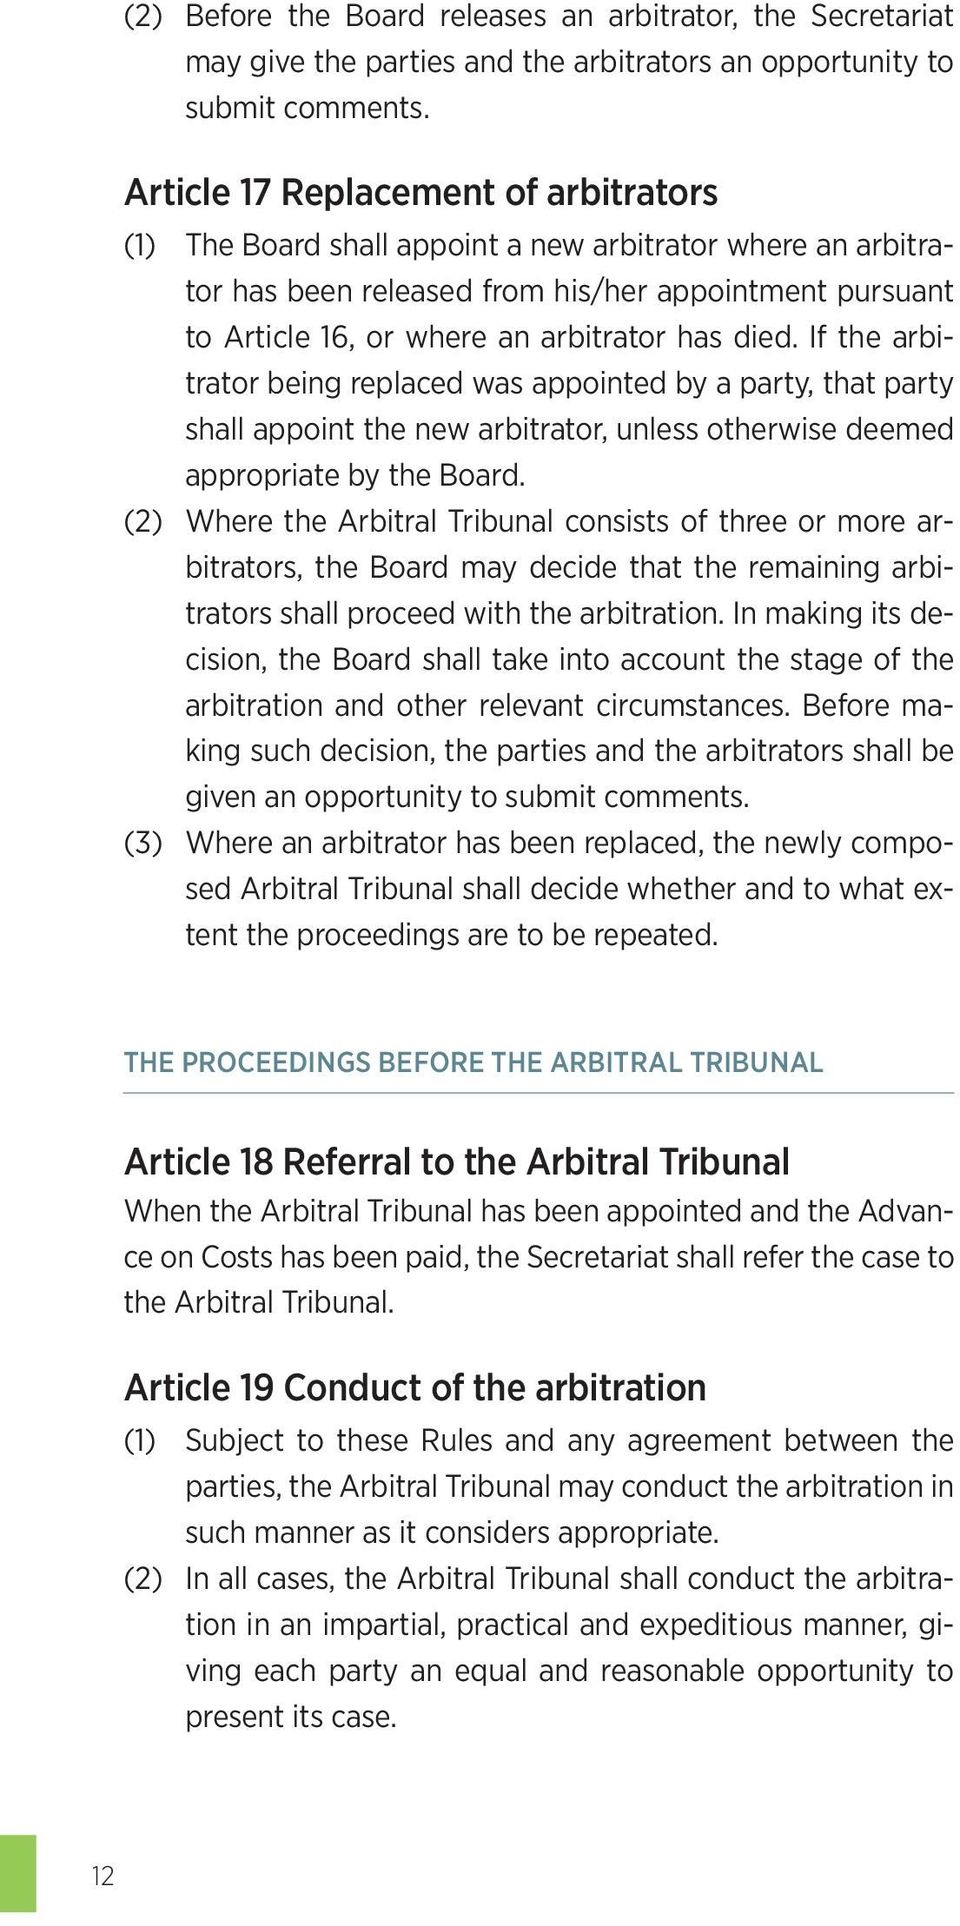 died. If the arbitrator being replaced was appointed by a party, that party shall appoint the new arbitrator, unless otherwise deemed appropriate by the Board.